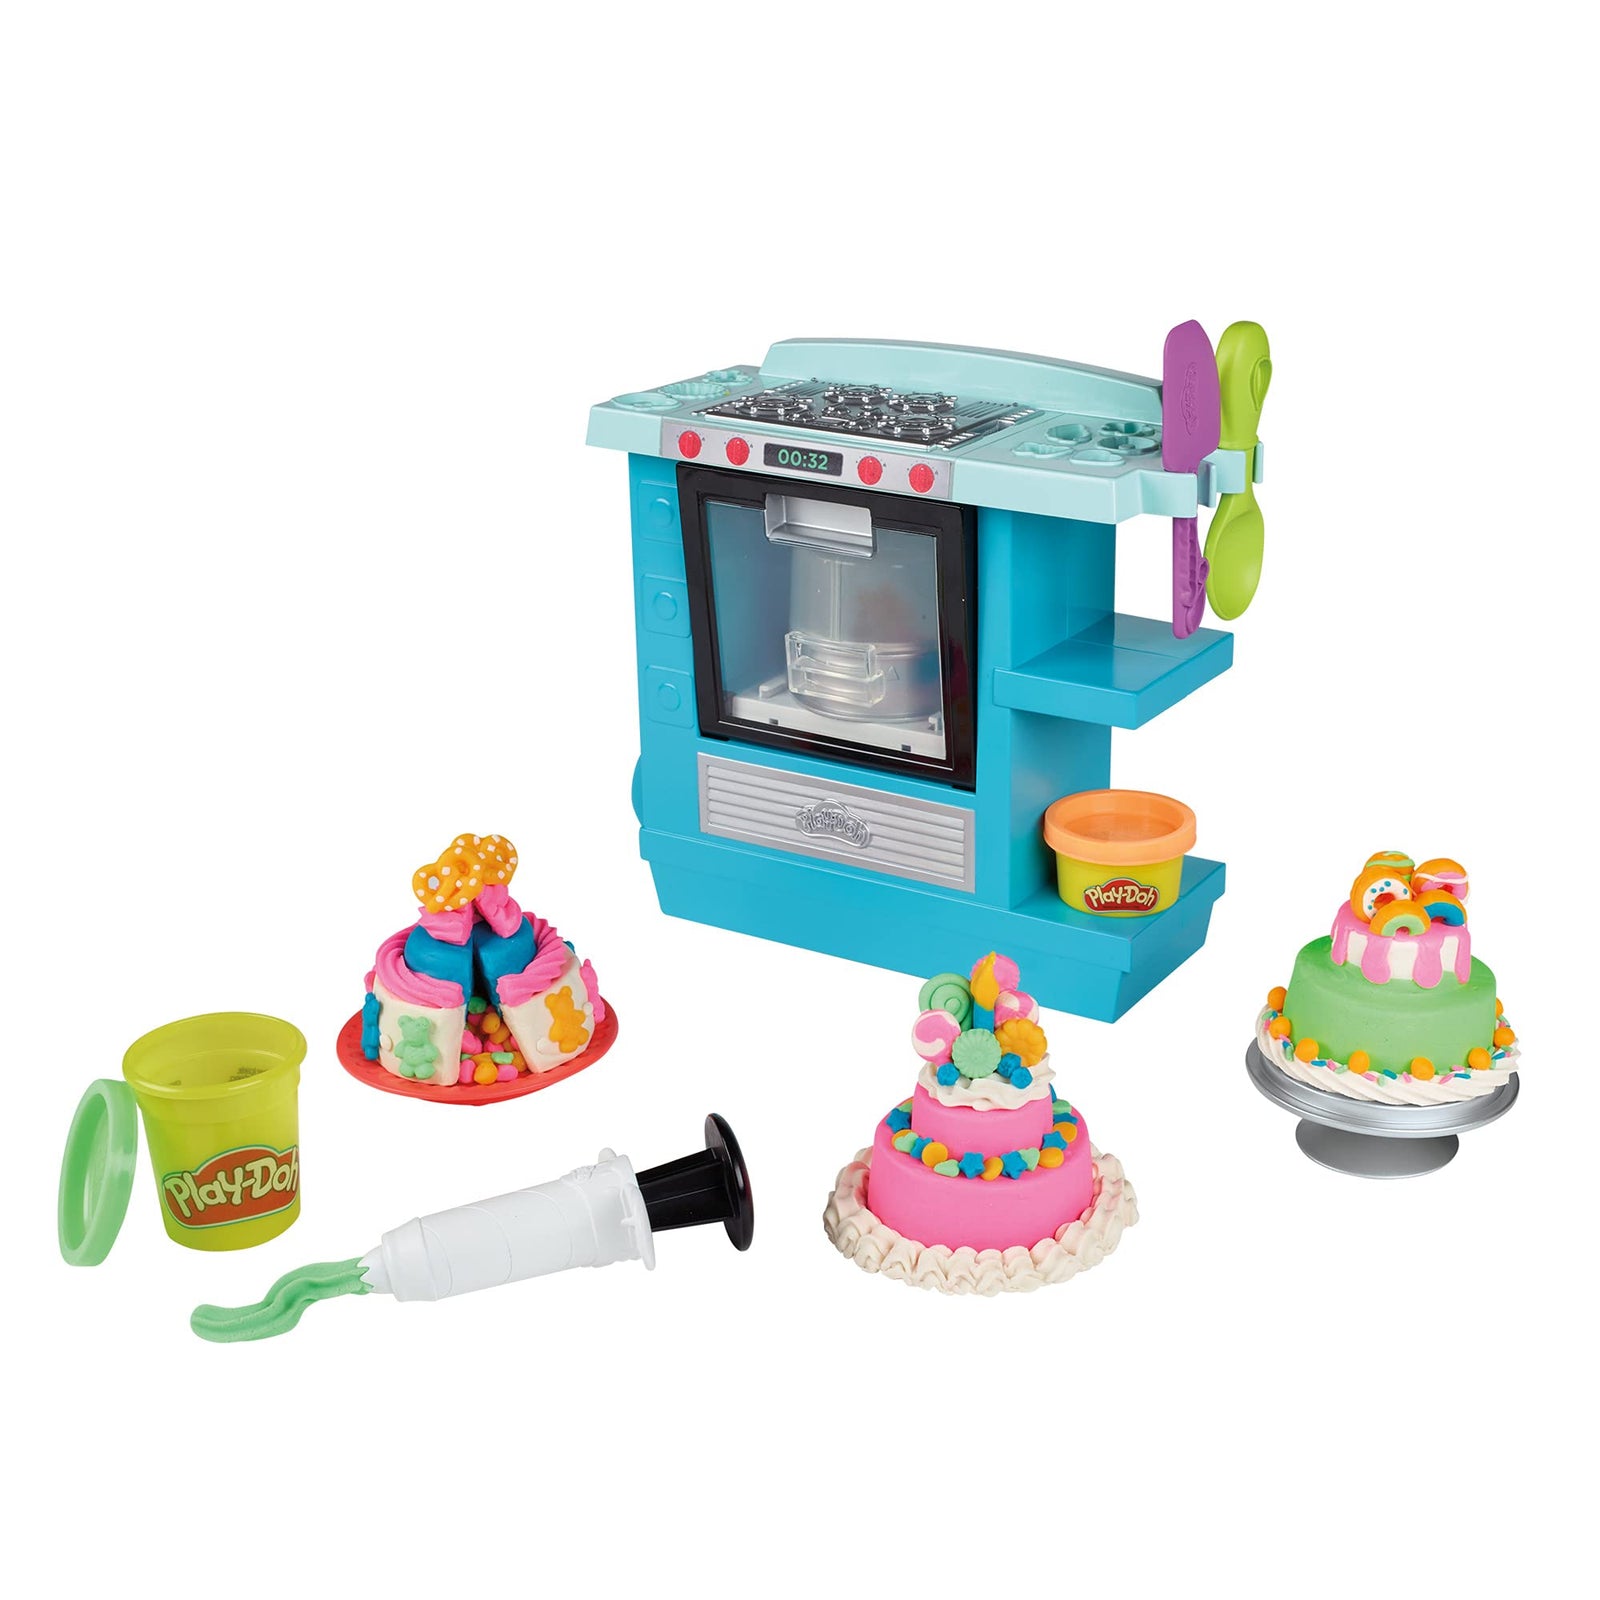 Play-Doh Kitchen Creations Rising Cake Oven Bakery Playset for Kids 3 Years and Up with 5 Modeling Compound Colors, Non-Toxic